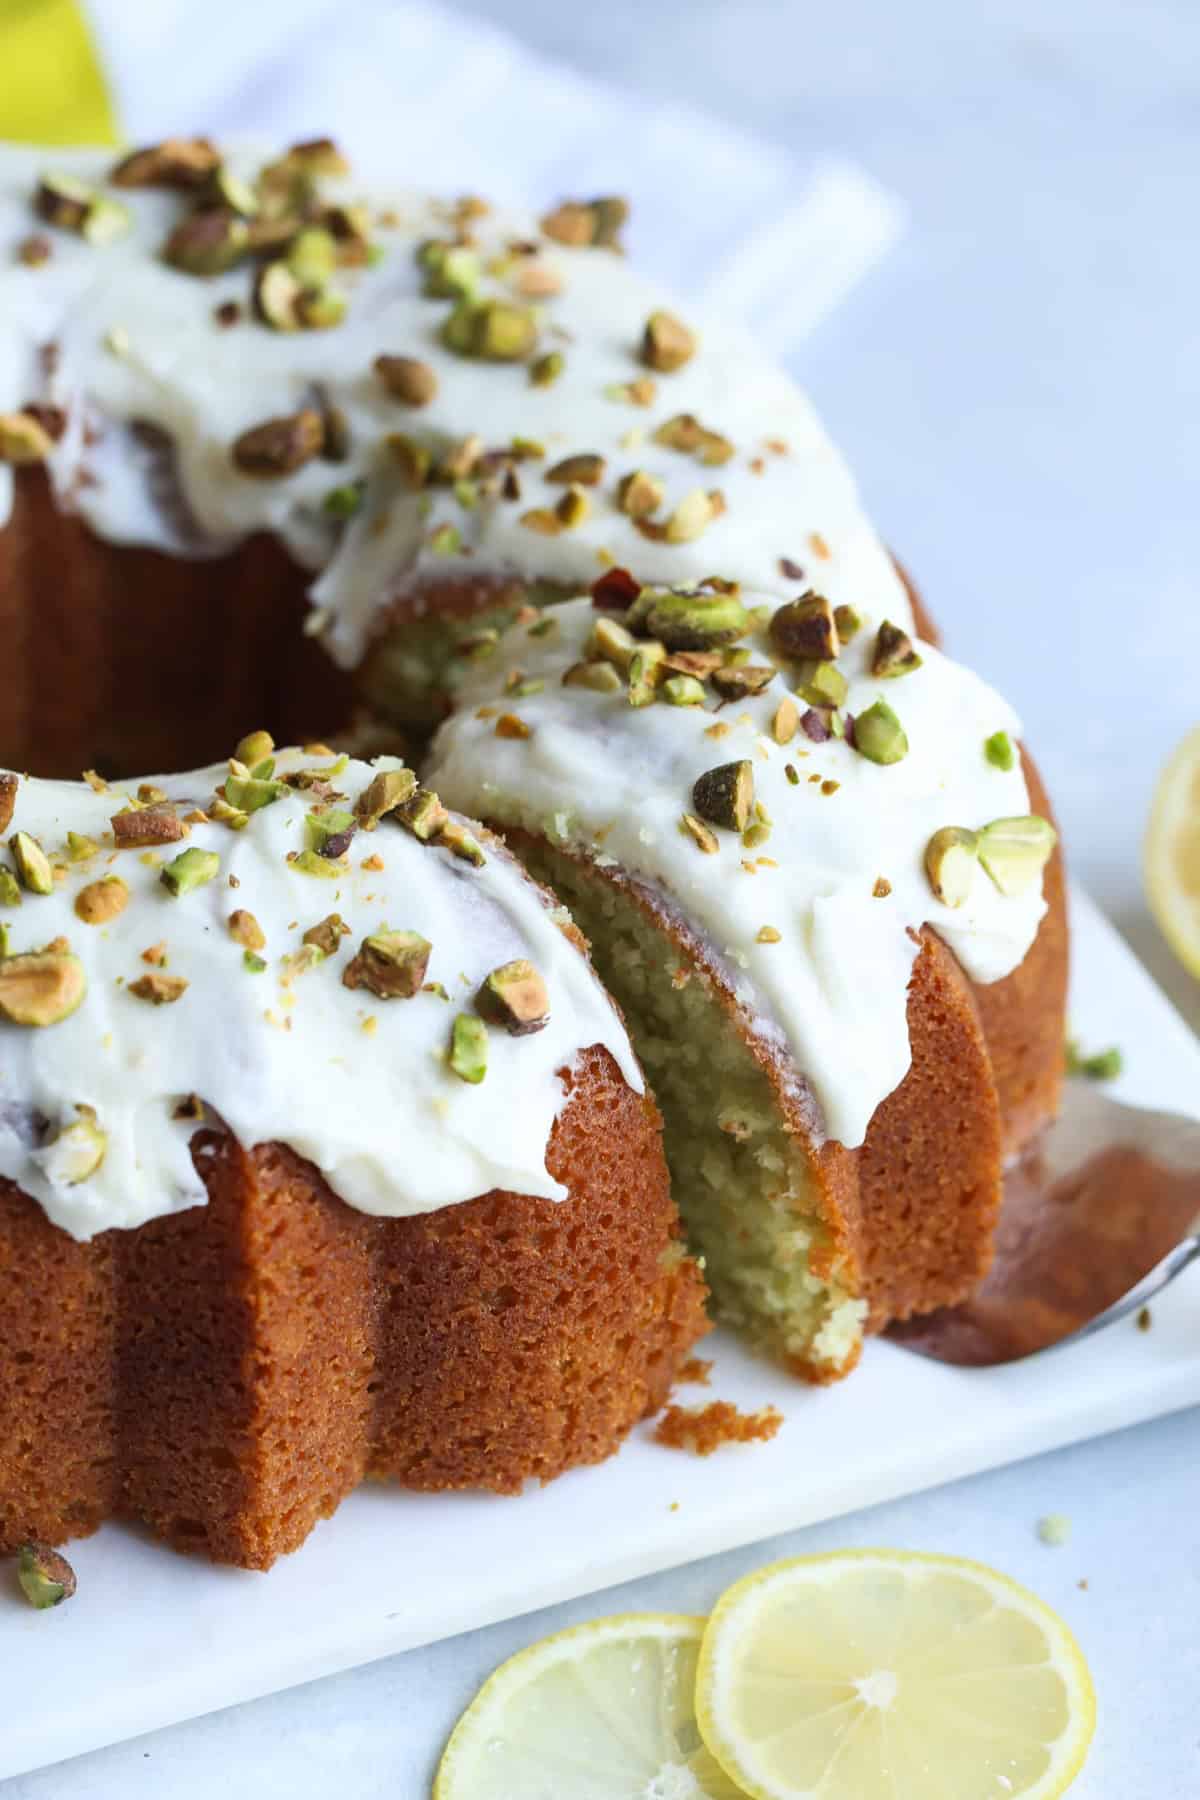 Frosted pistachio lemon bundt cake garnished with crushed pistachios on a square plate with a slice being served.